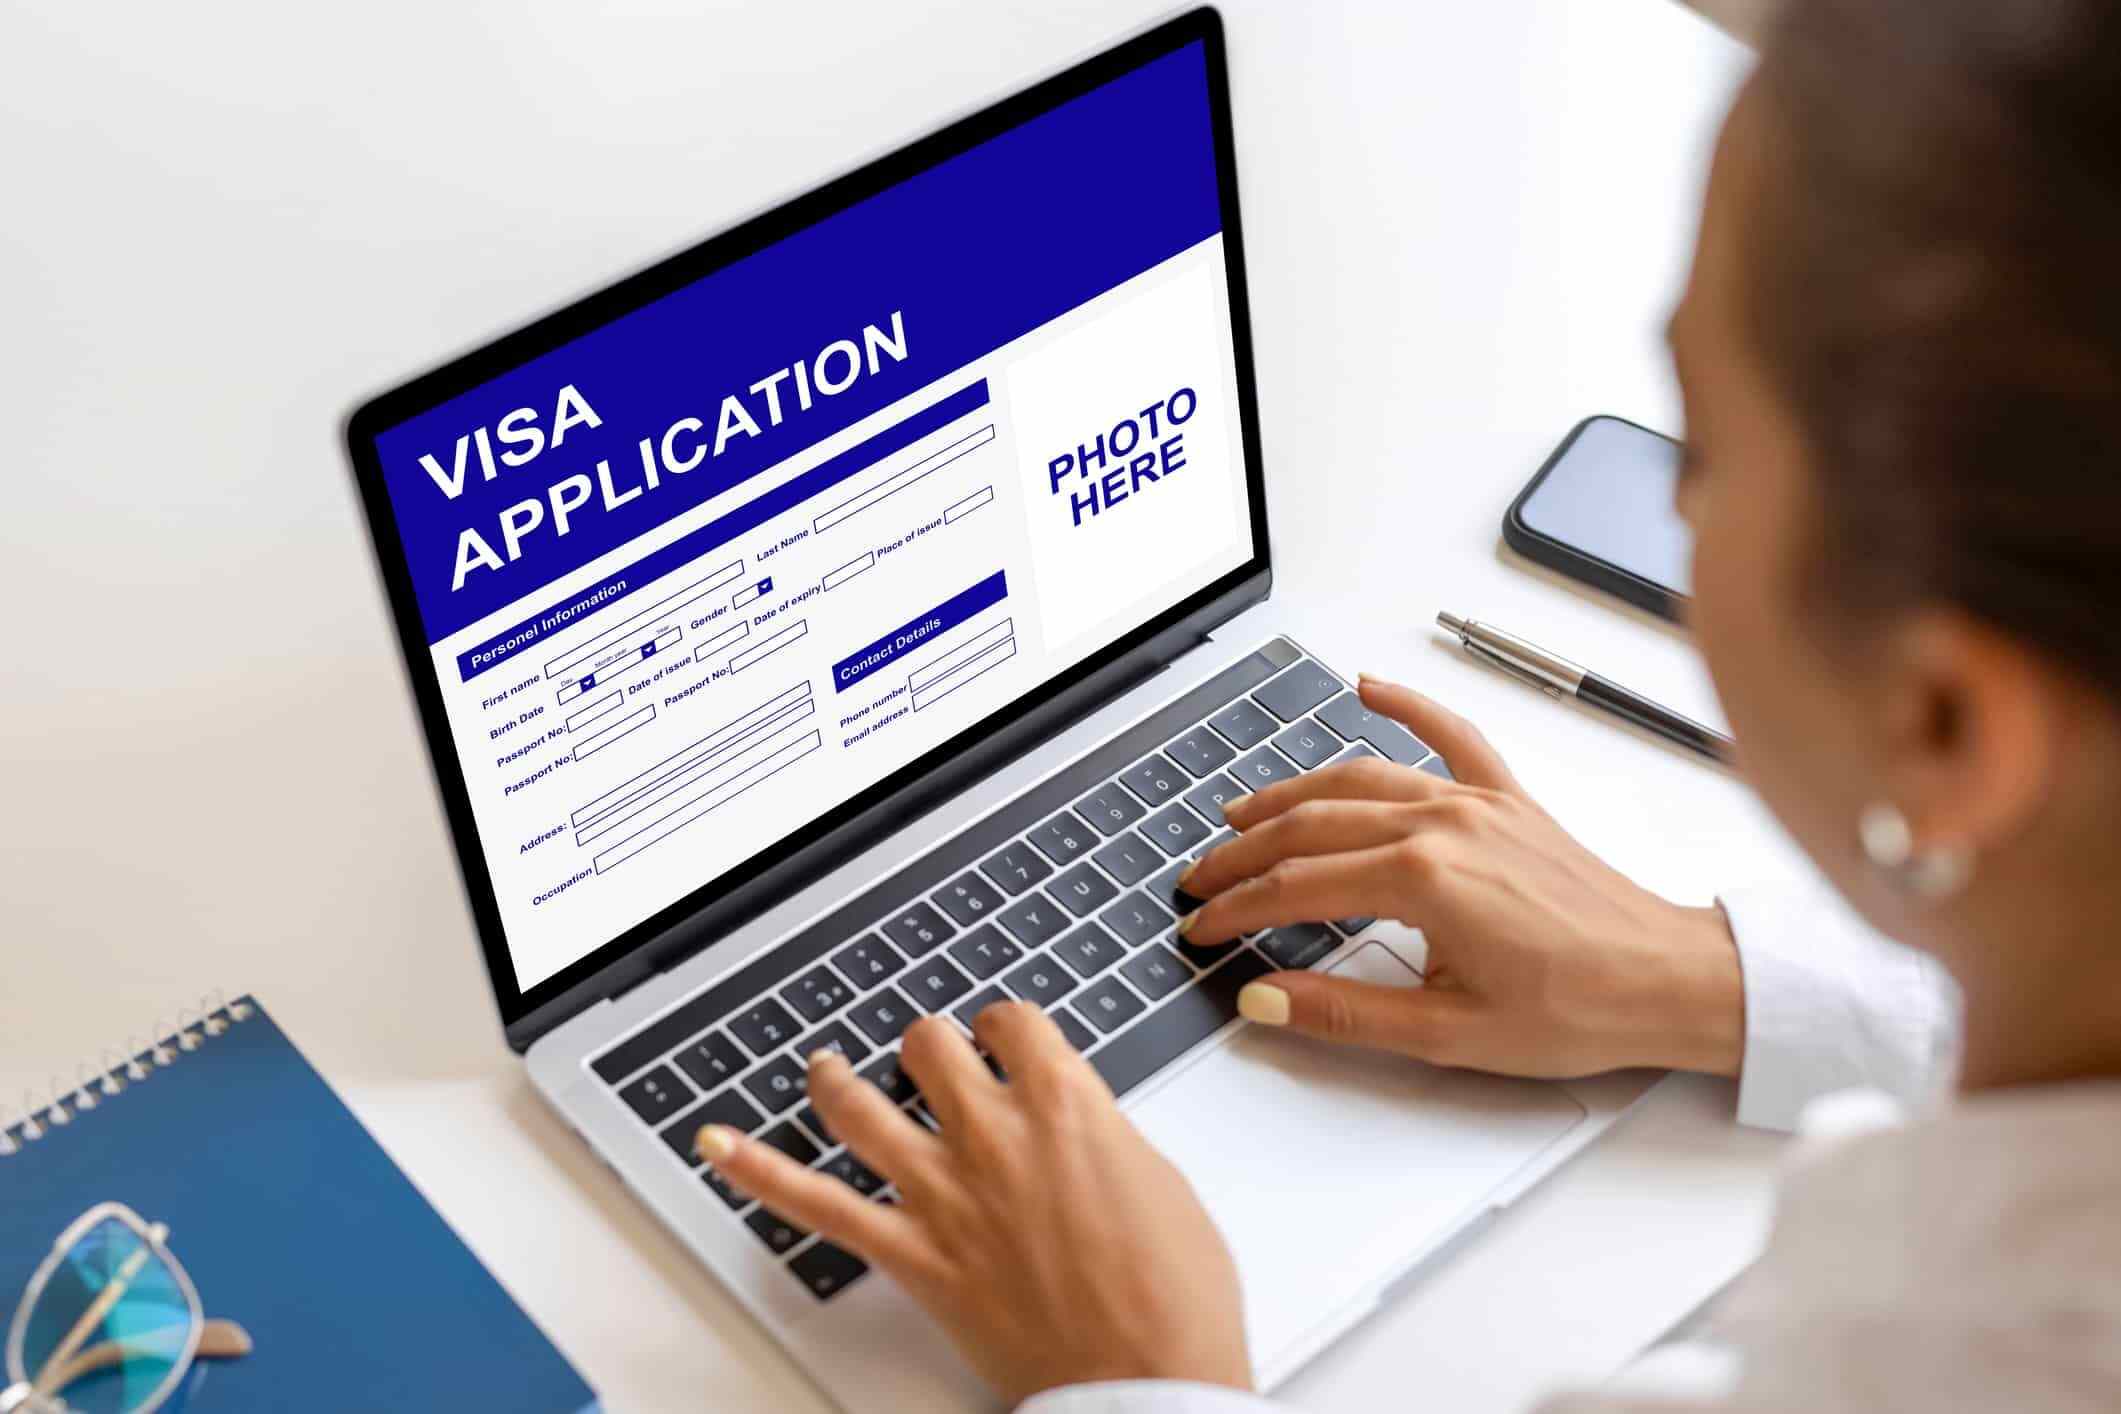 A blank visa application form titled "VISA APPLICATION" with sections to be filled out for personal information, a photo, and contact details.